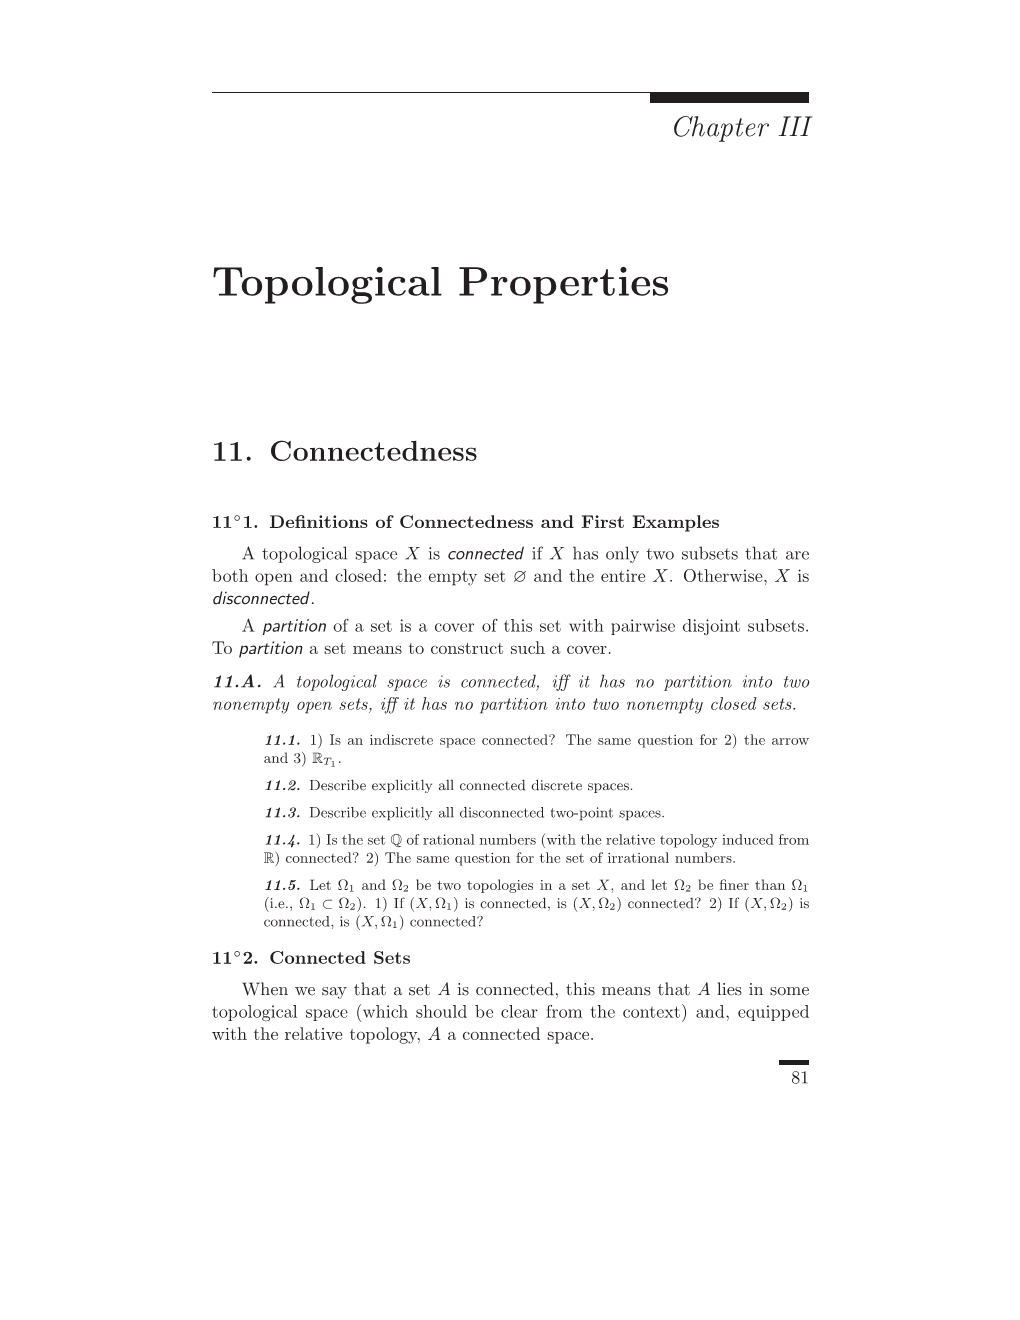 Topological Properties